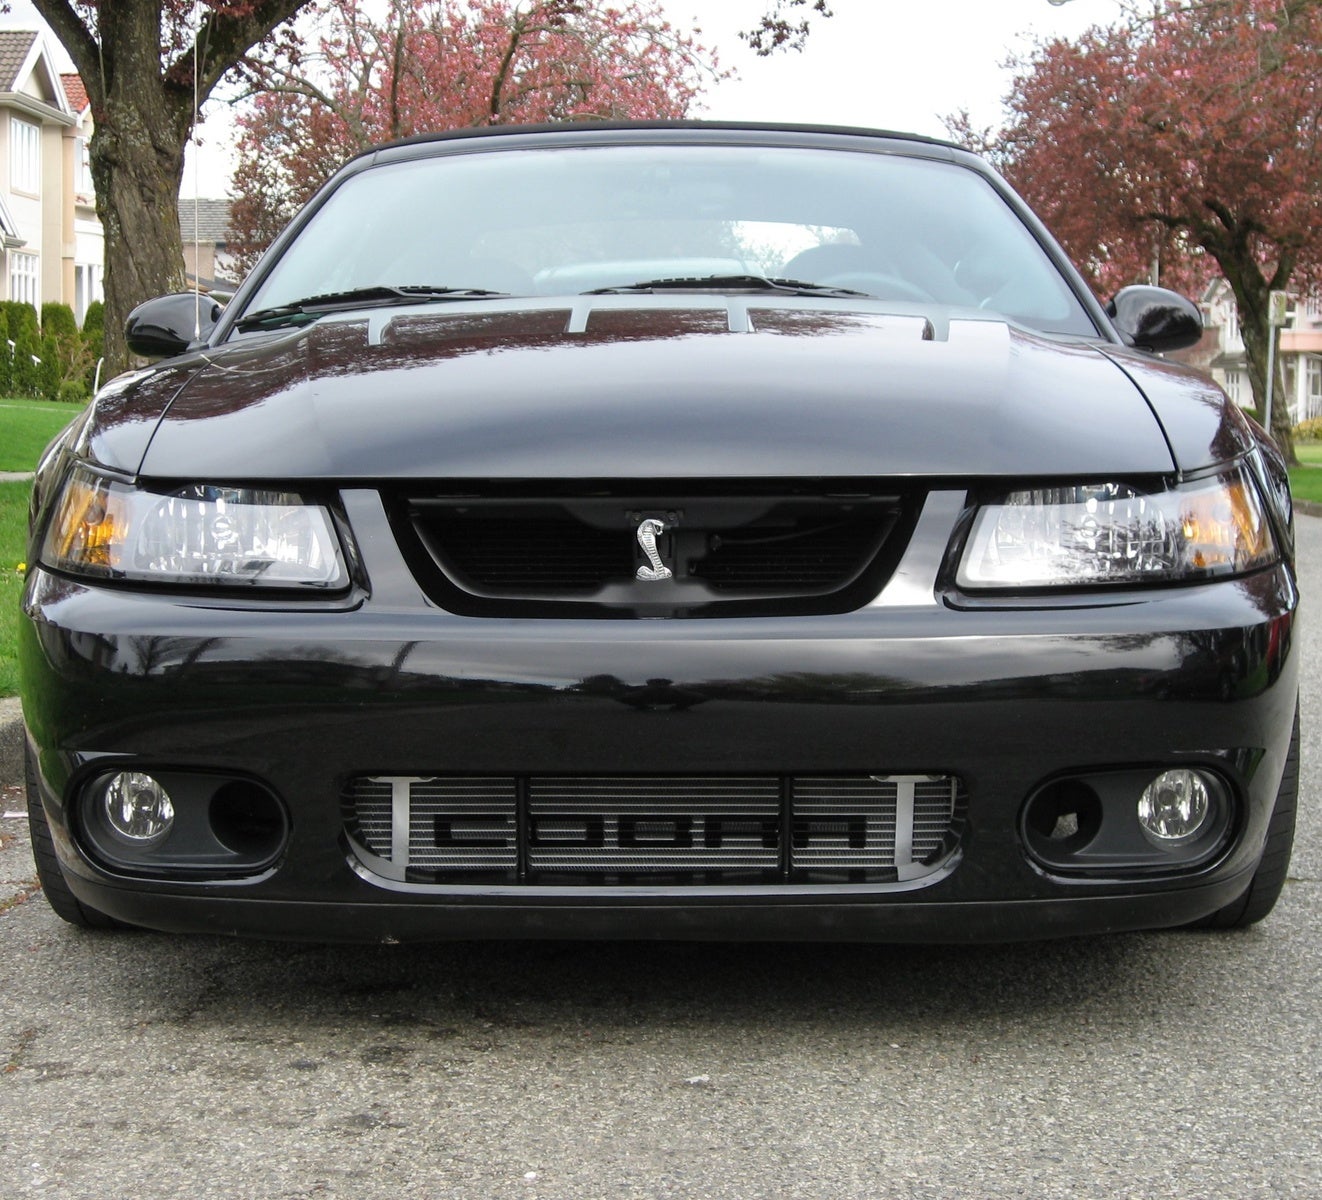 2003 Ford Mustang SVT Cobra - Other Pictures - CarGurus